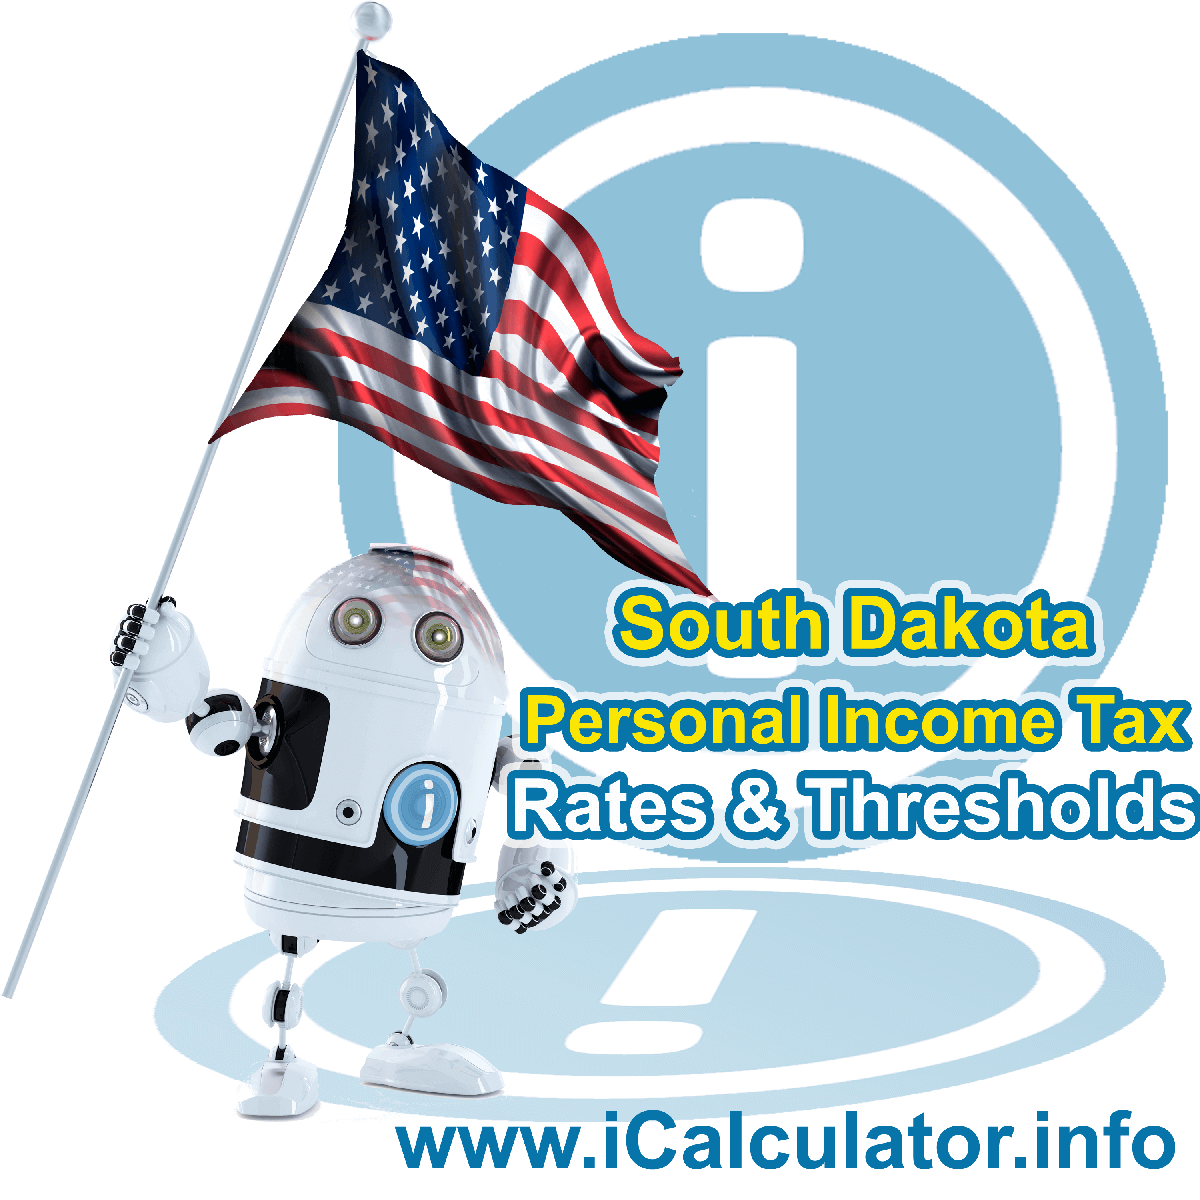 South Dakota State Tax Tables 2023. This image displays details of the South Dakota State Tax Tables for the 2023 tax return year which is provided in support of the 2023 US Tax Calculator